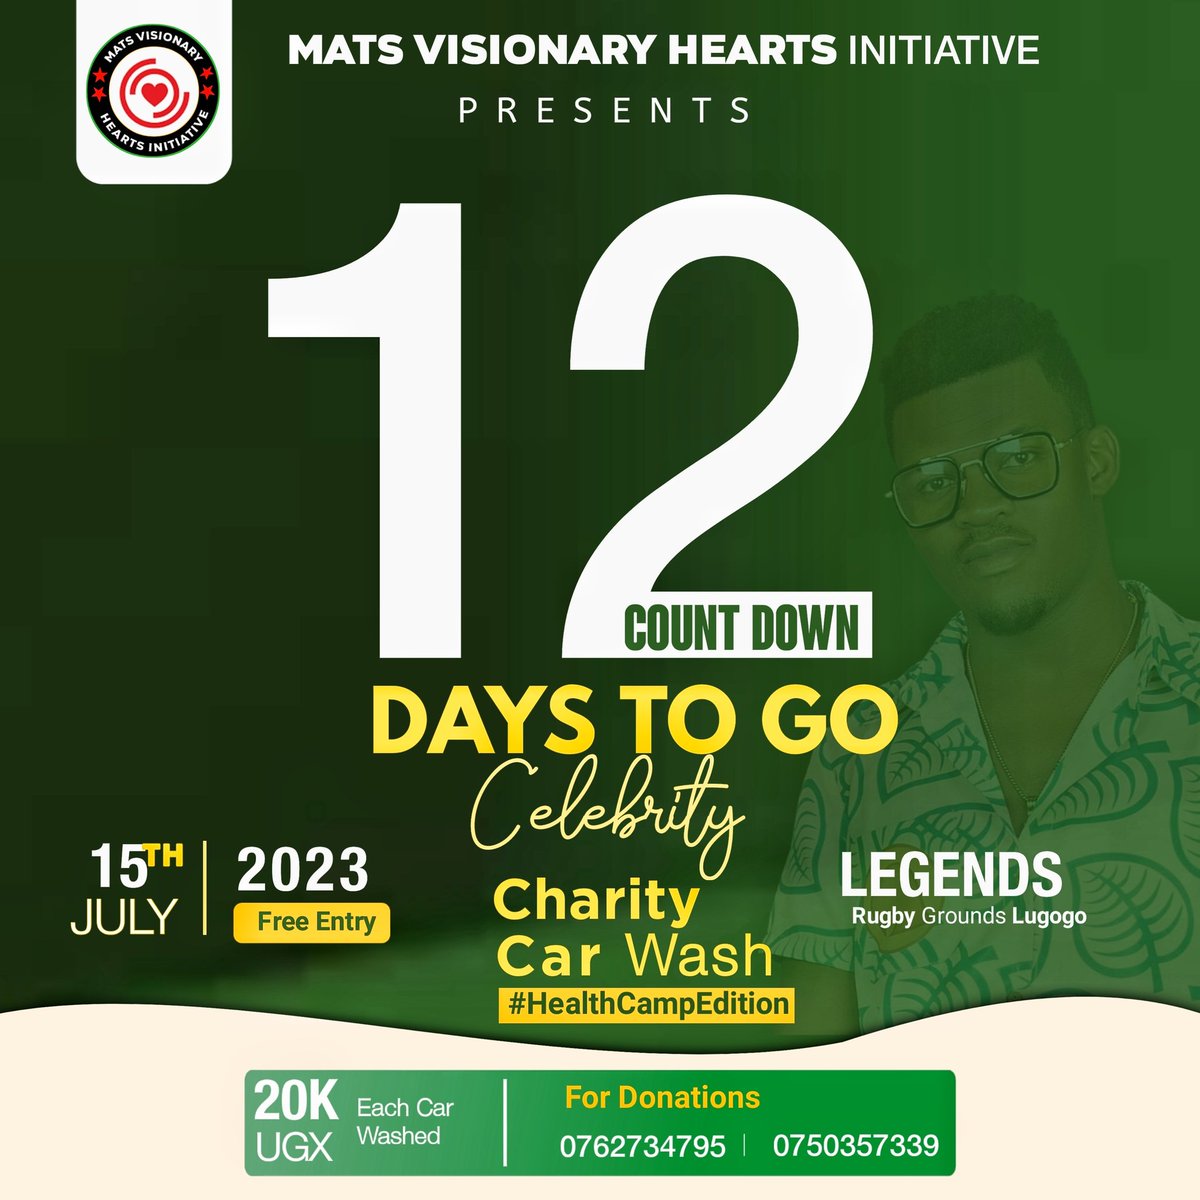 We are counting down to days...
#celebritycharitycarwash 
#healthcampedition 
#15thjuly2023